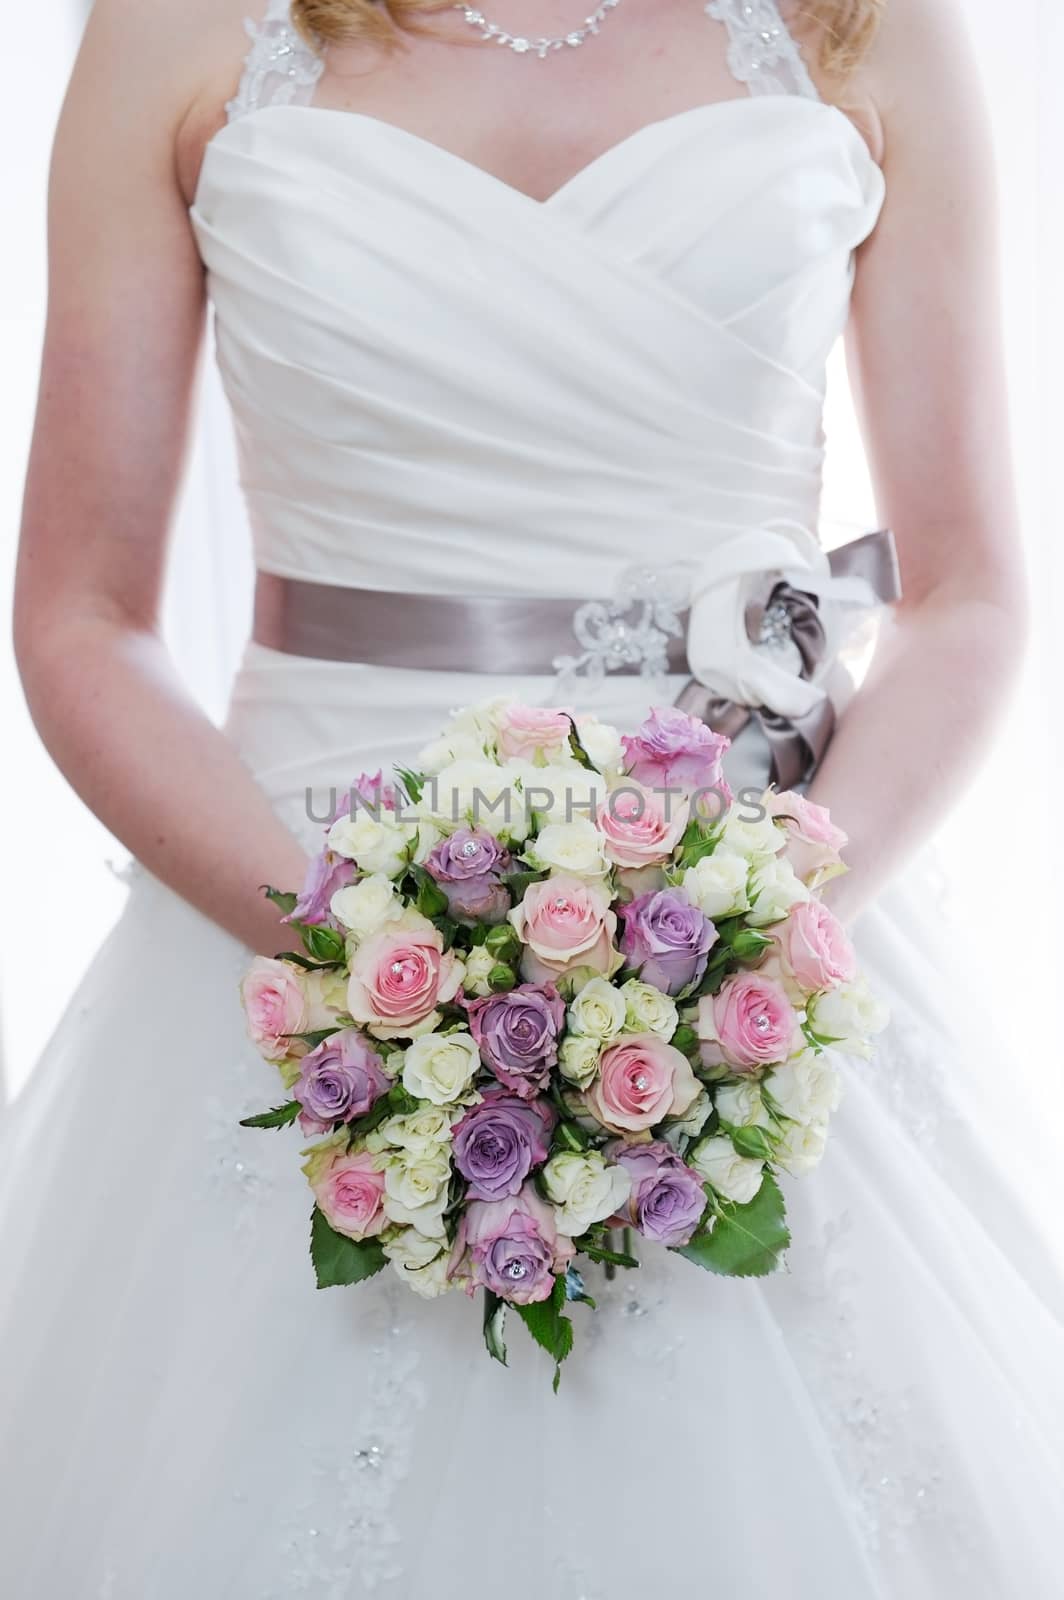 Brides bouquet and dress detail by kmwphotography